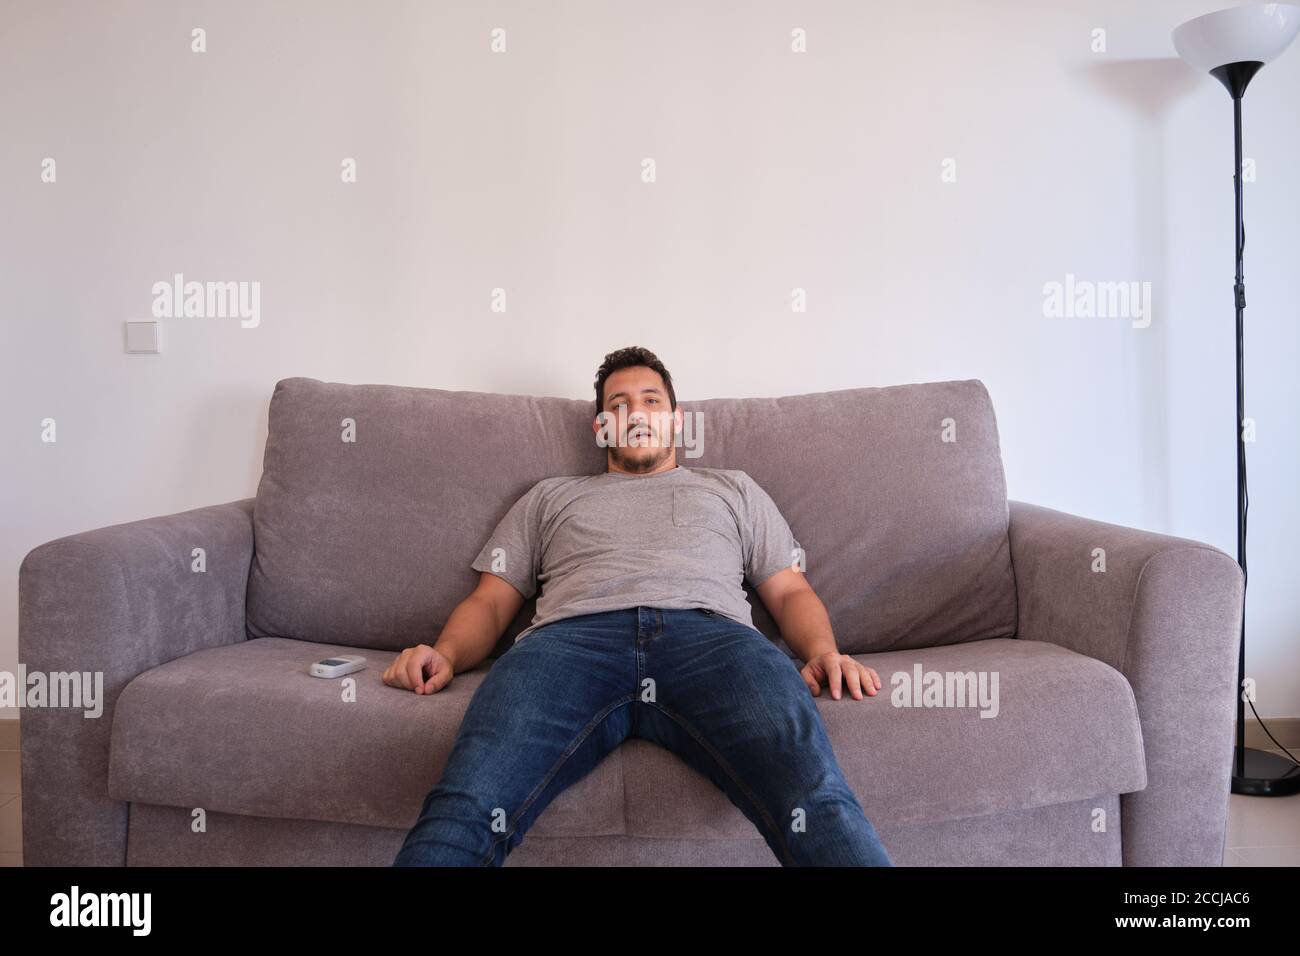 Portrait of a bored and tired young man sitting on a sofa watching television absorbed with his mouth opened. Stock Photo